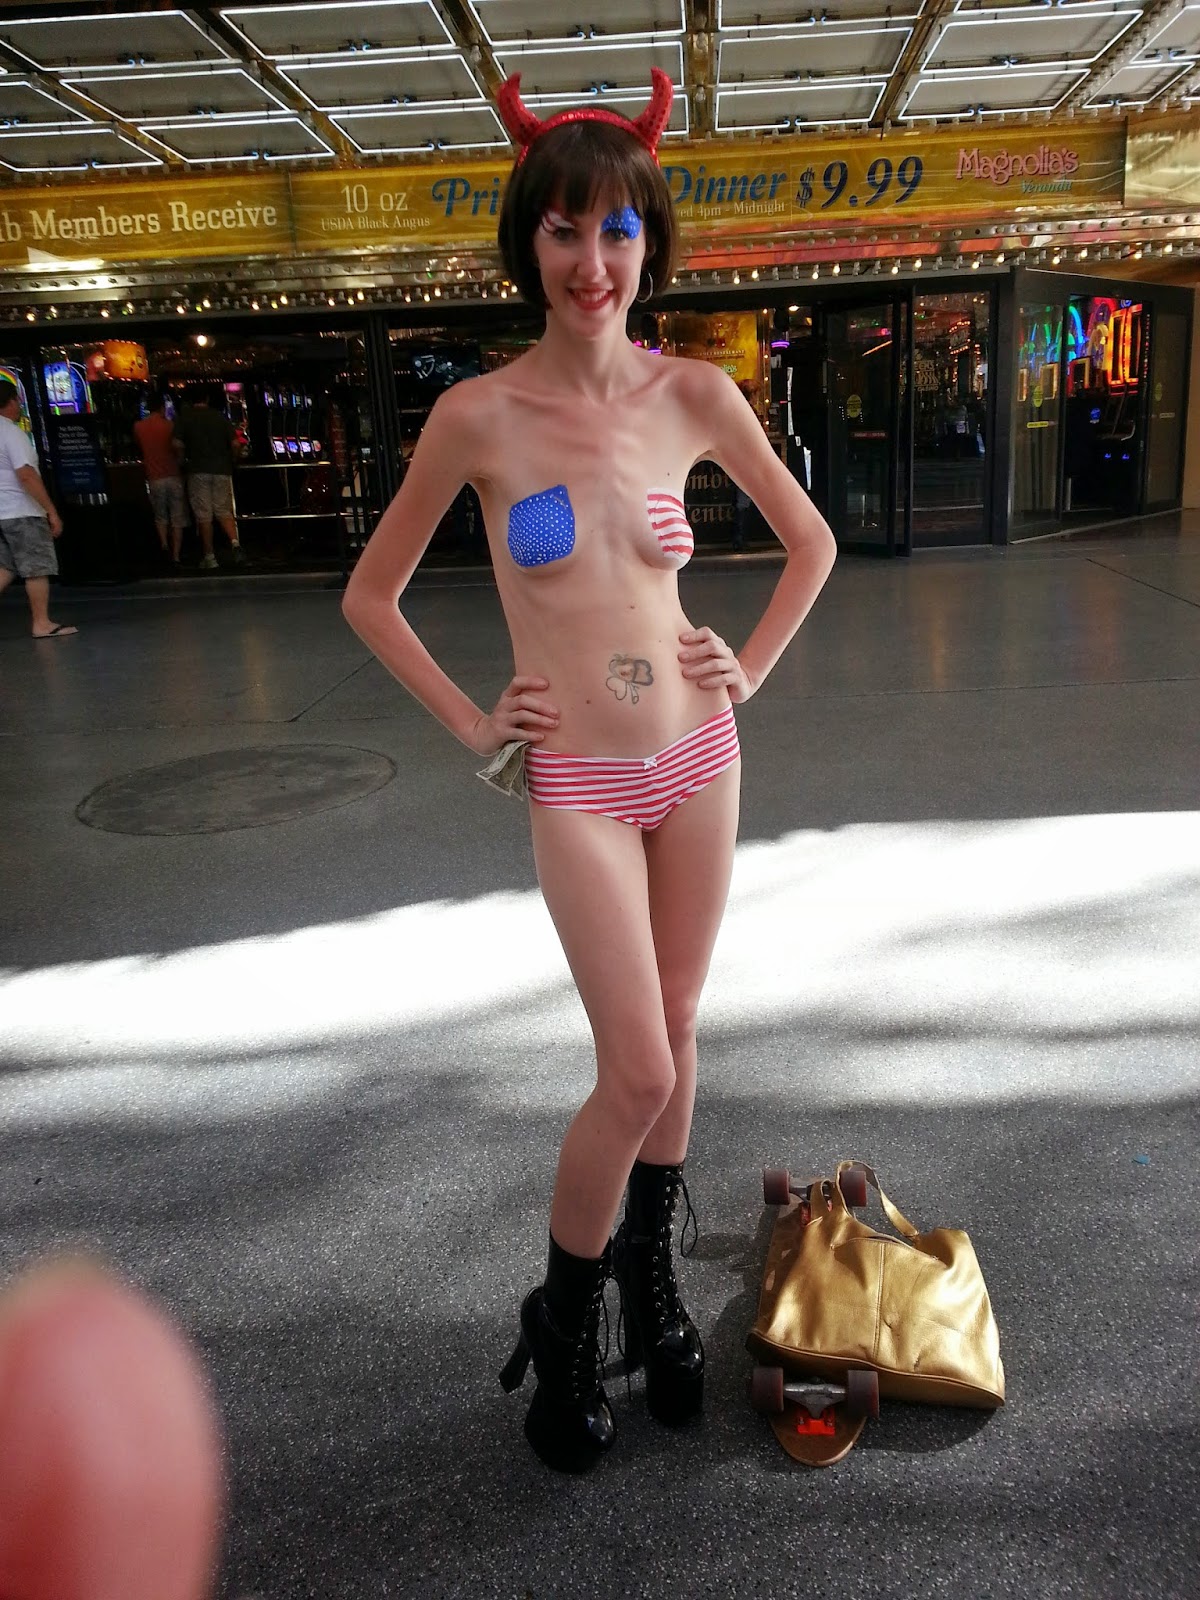 Las vegas naked girls pictures - Sex archive